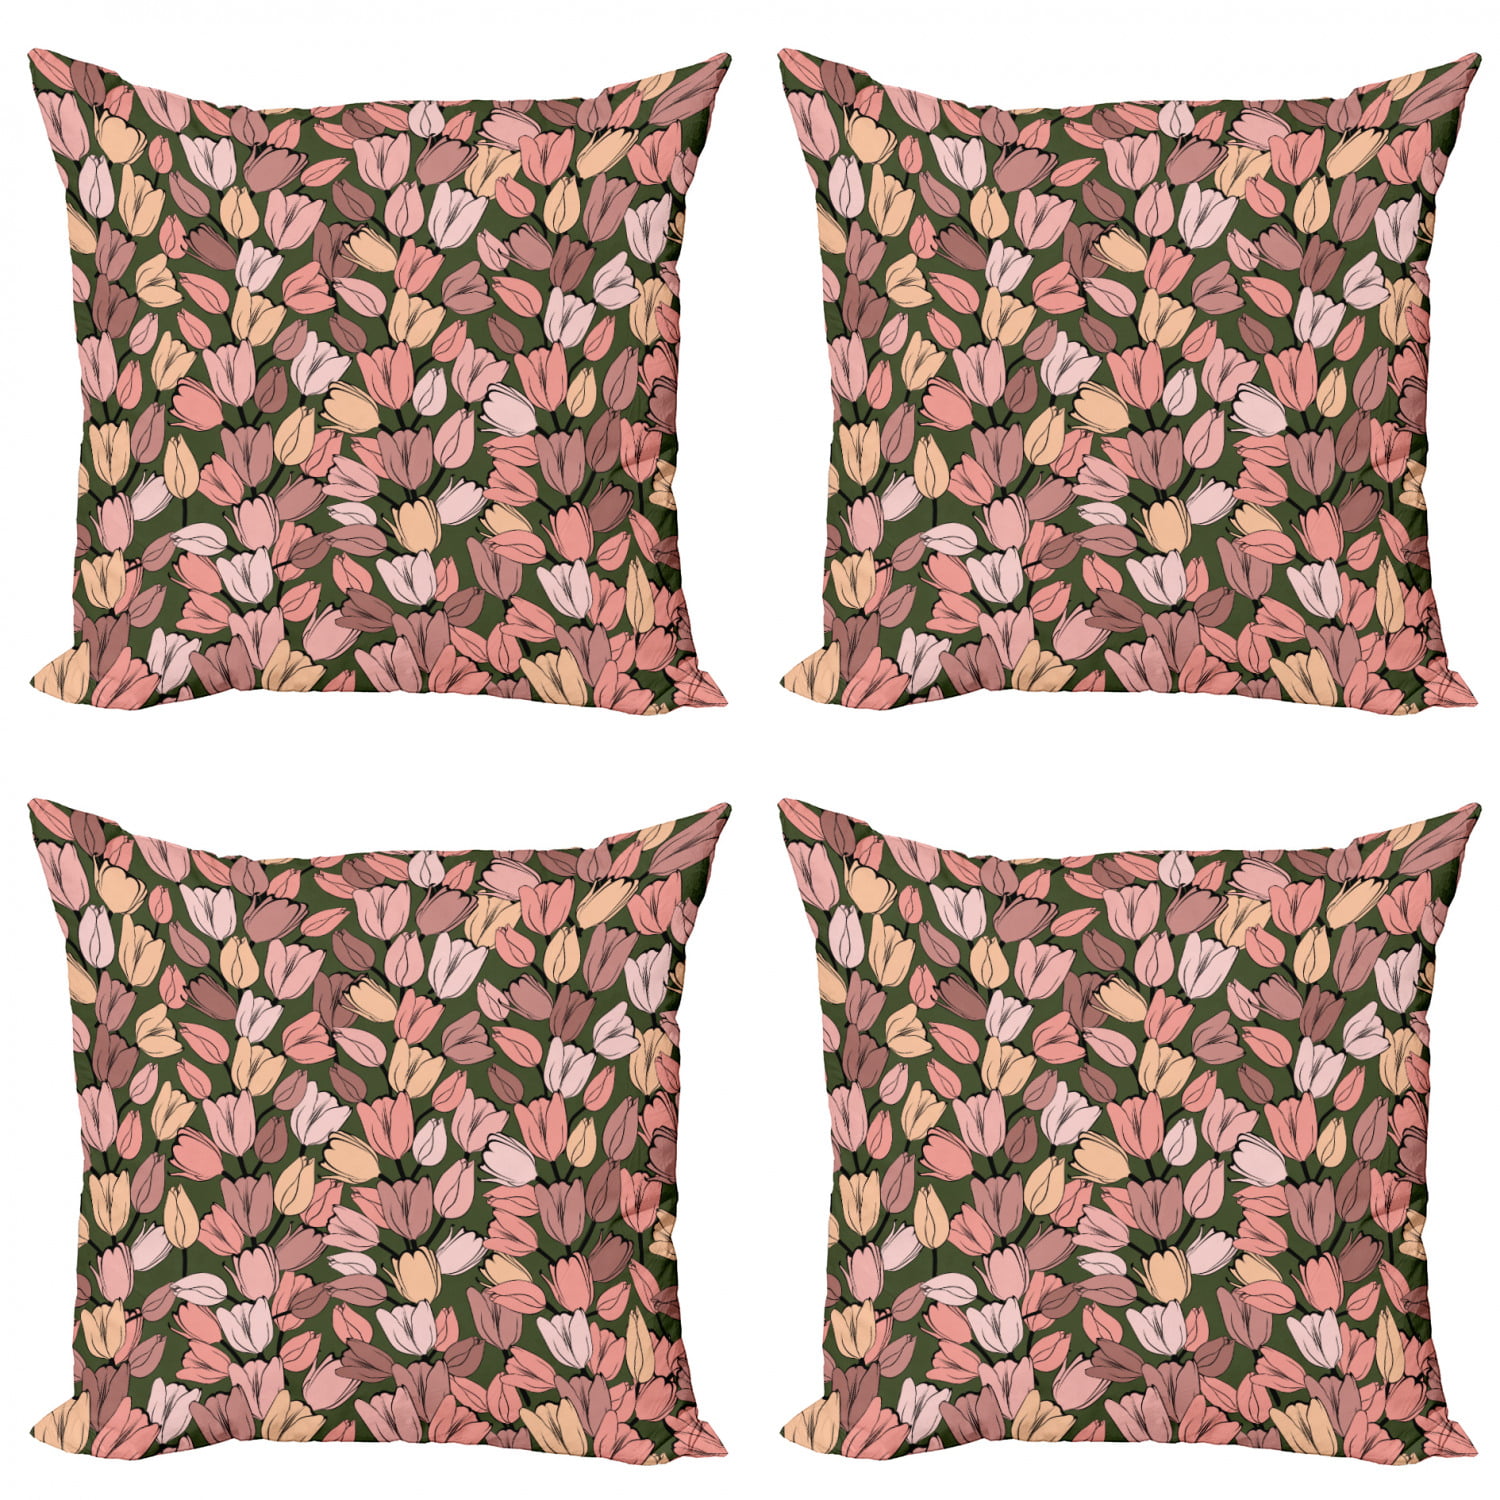 Decorative Square Accent Pillow Case 24 X 24 Brown Orange Peach Composition with Floral Intricacy Folk Details Ambesonne Earth Tones Throw Pillow Cushion Cover